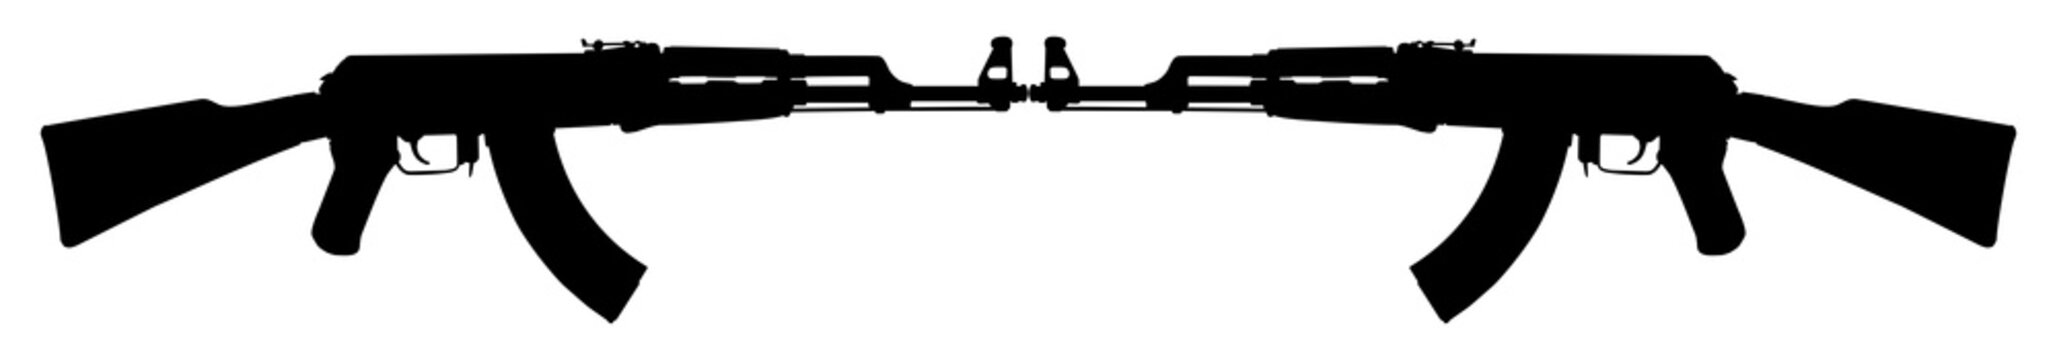 Silhouette of the AK 47 Gun for Pictogram or Graphic Design Element. Format PNG